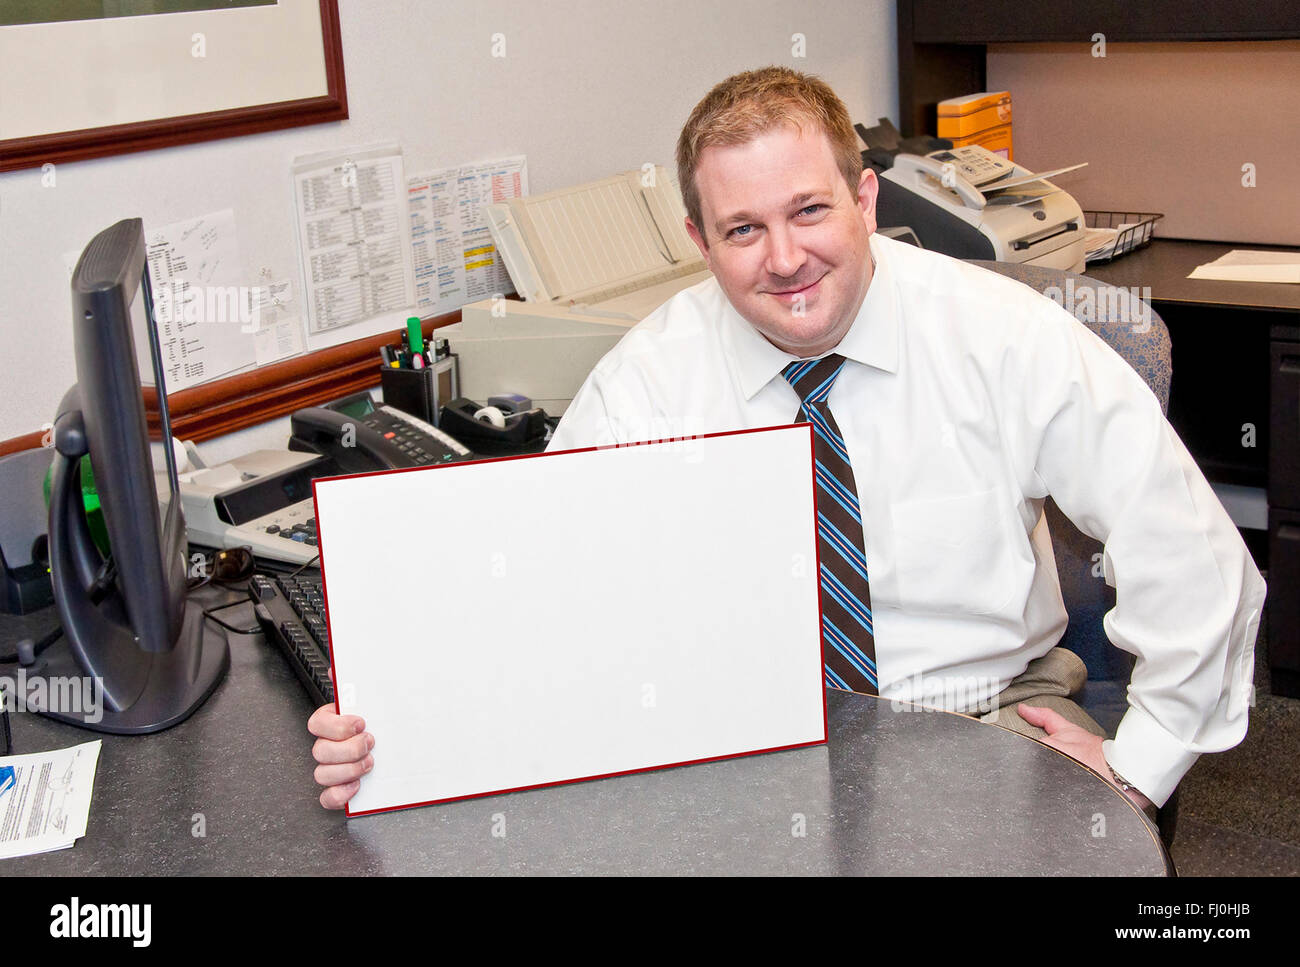 Amused Businessman With Blank Sign Stock Photo